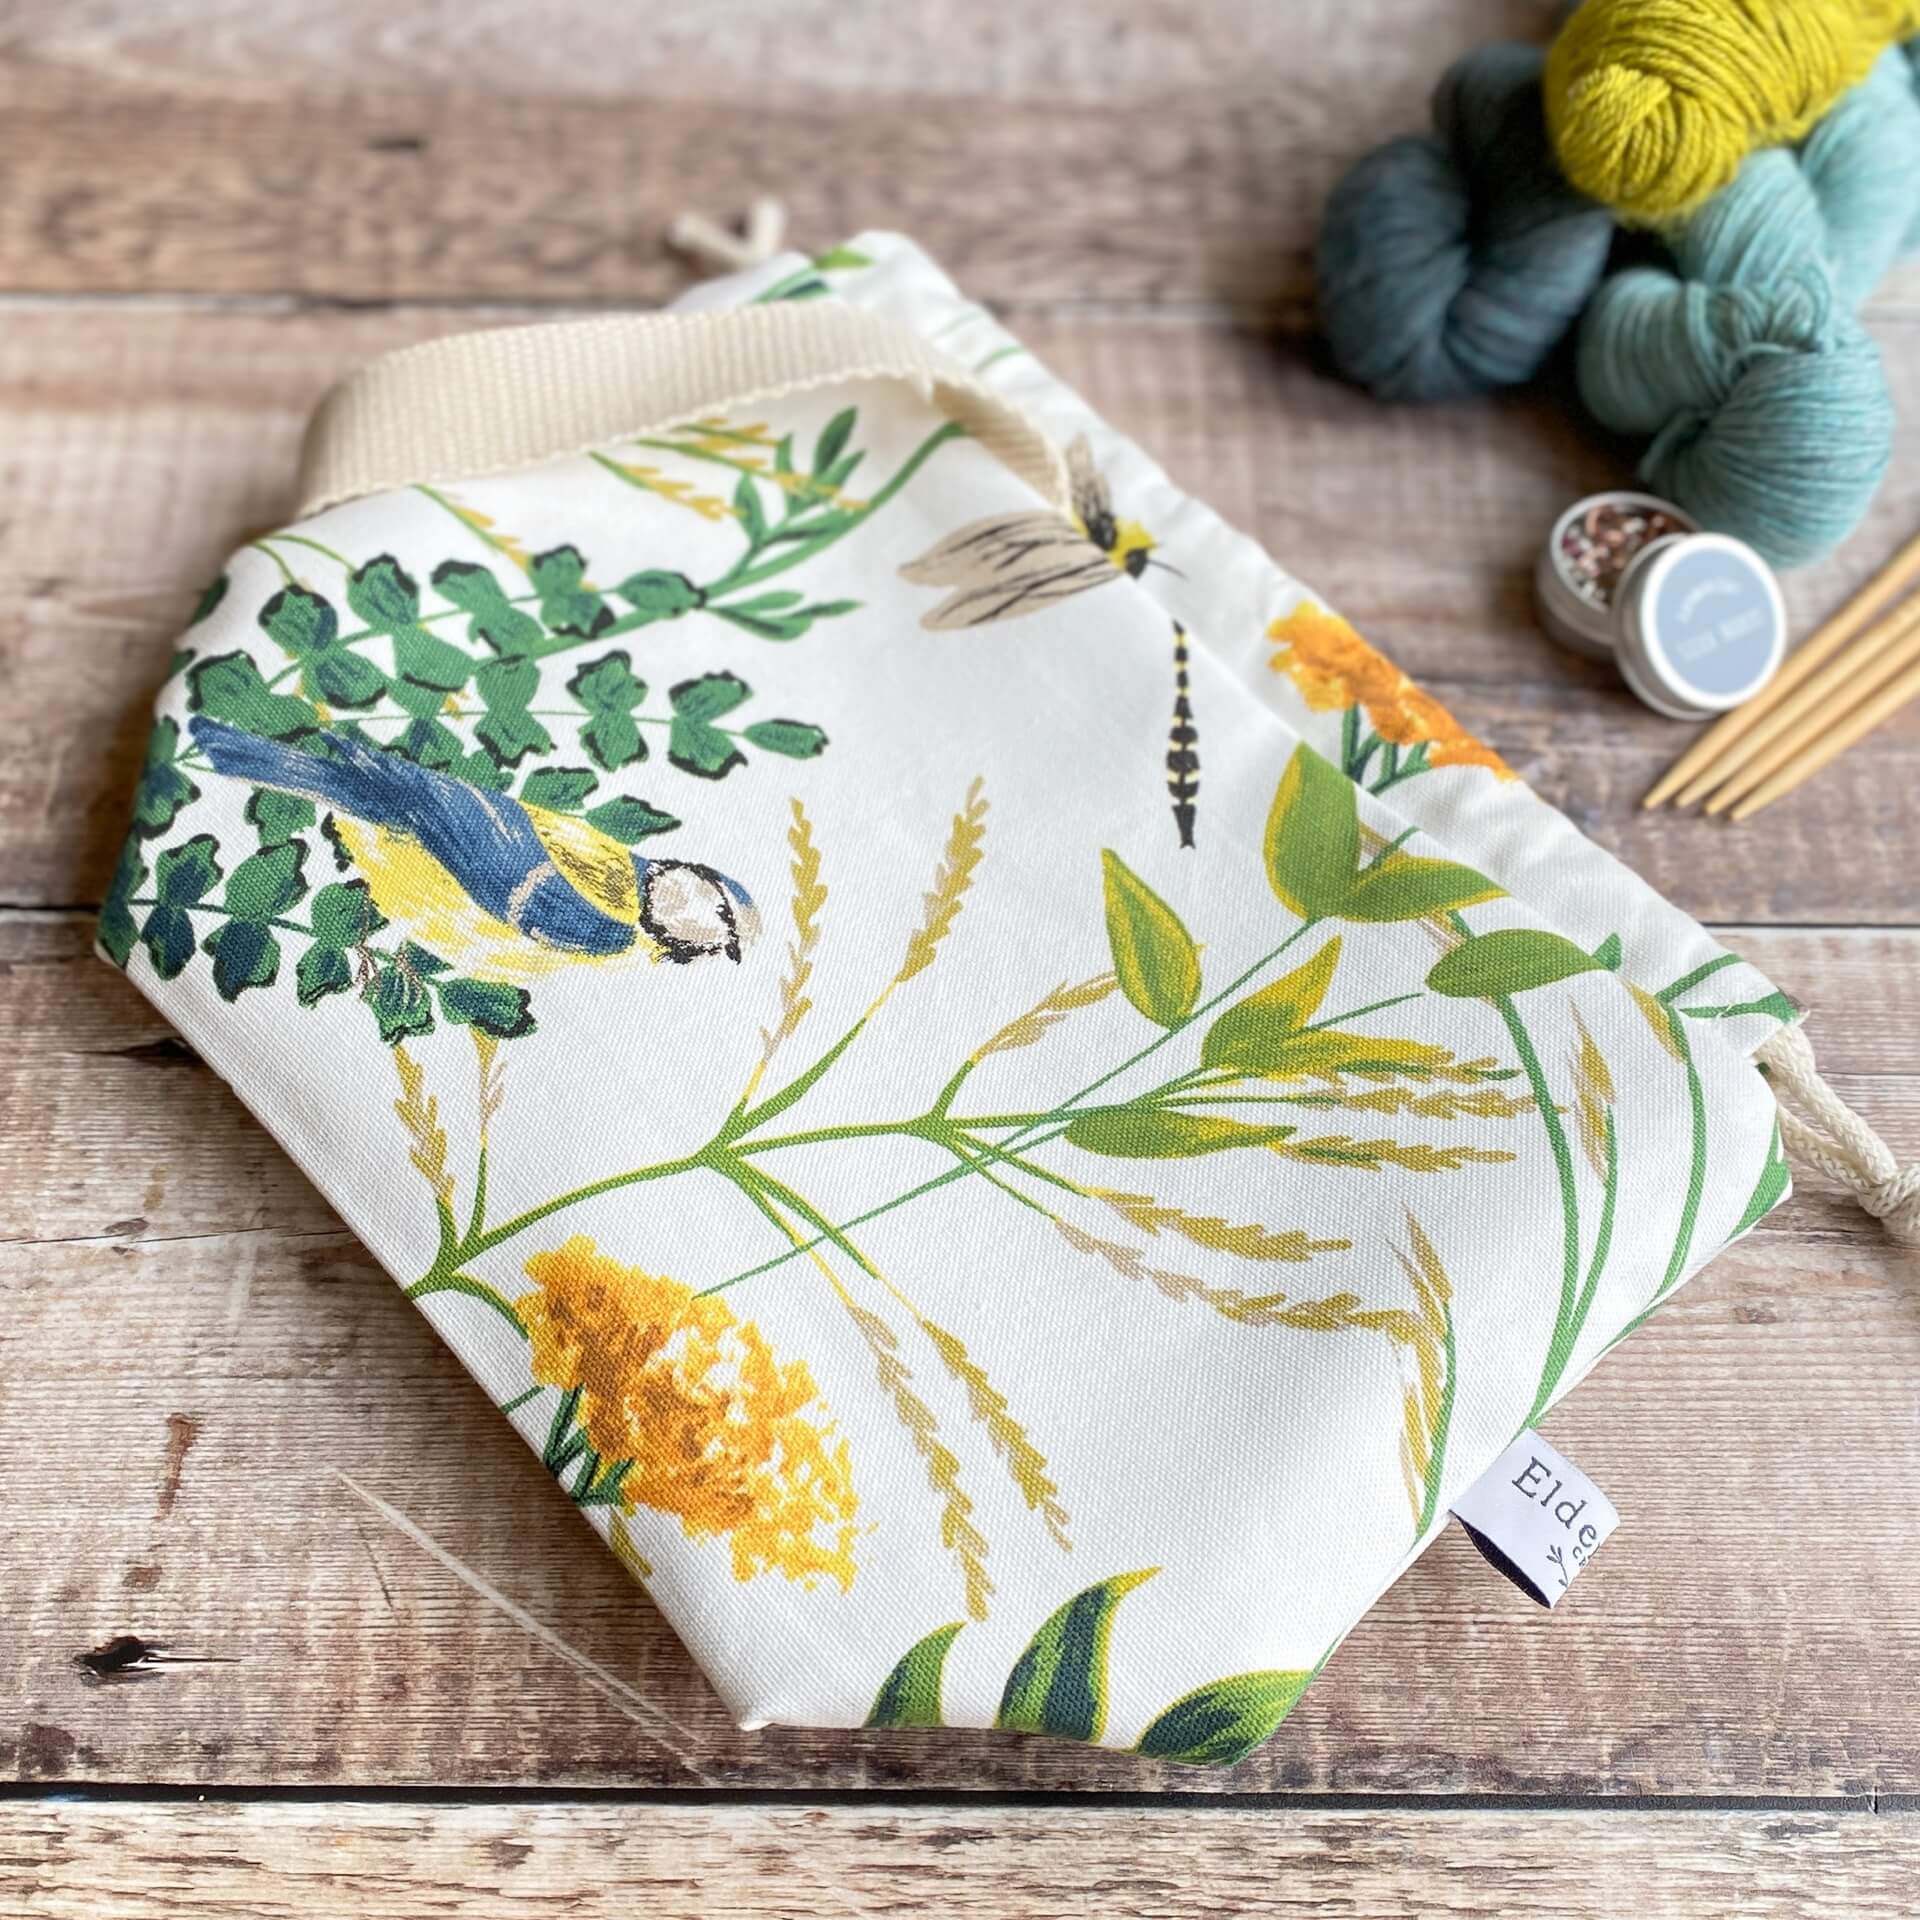 A kntting project bag lies flat on a wooden table top. Next to the bag are three skeins of yarn, some stitch markers and wooden knitting needles. The bag is made from fabric that shows a summery scene with foliage and a blue tit bird prominent. 